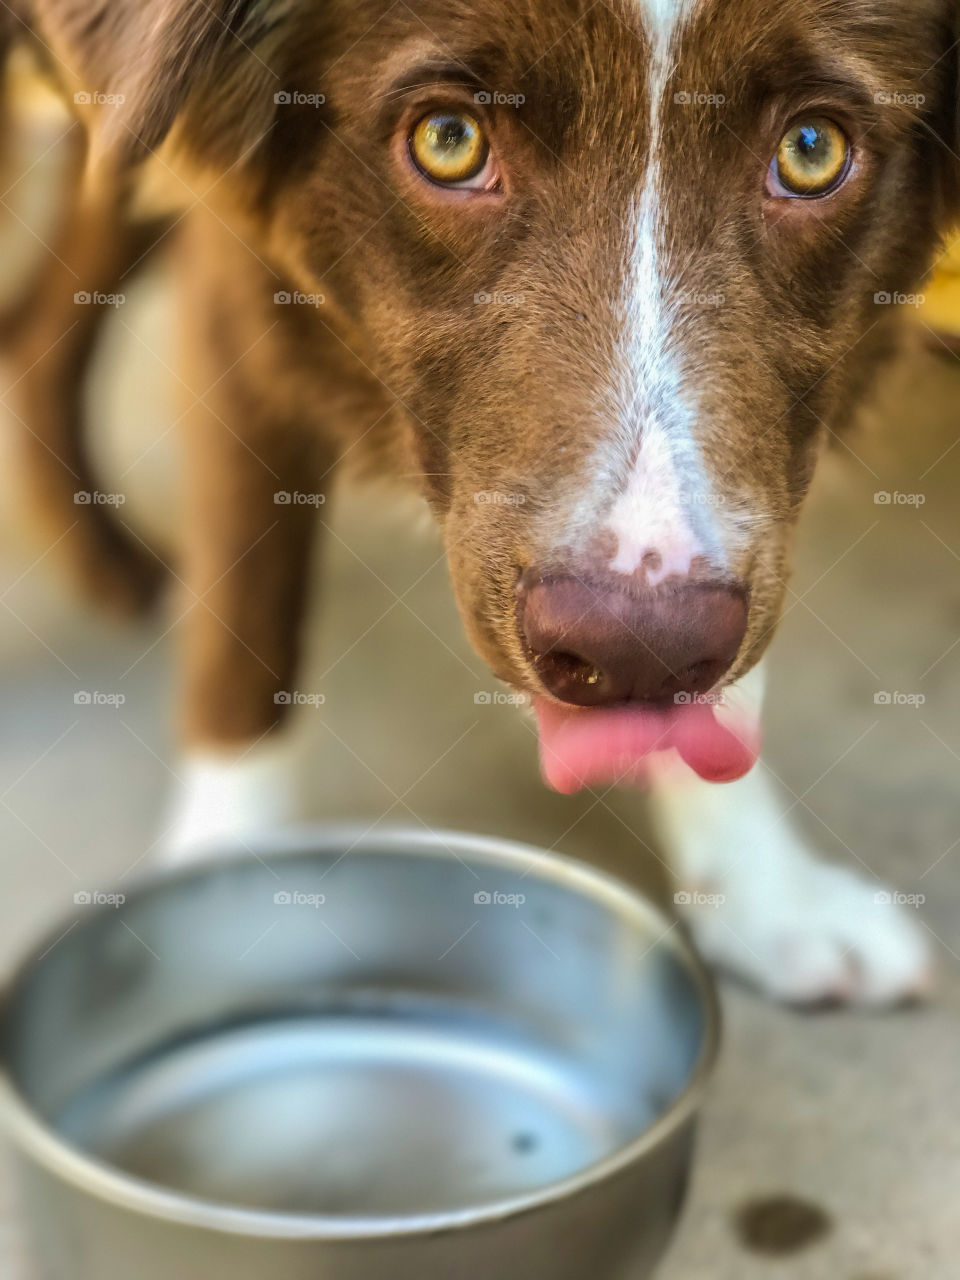 Thirsty puppy licking his lips over a water bowl